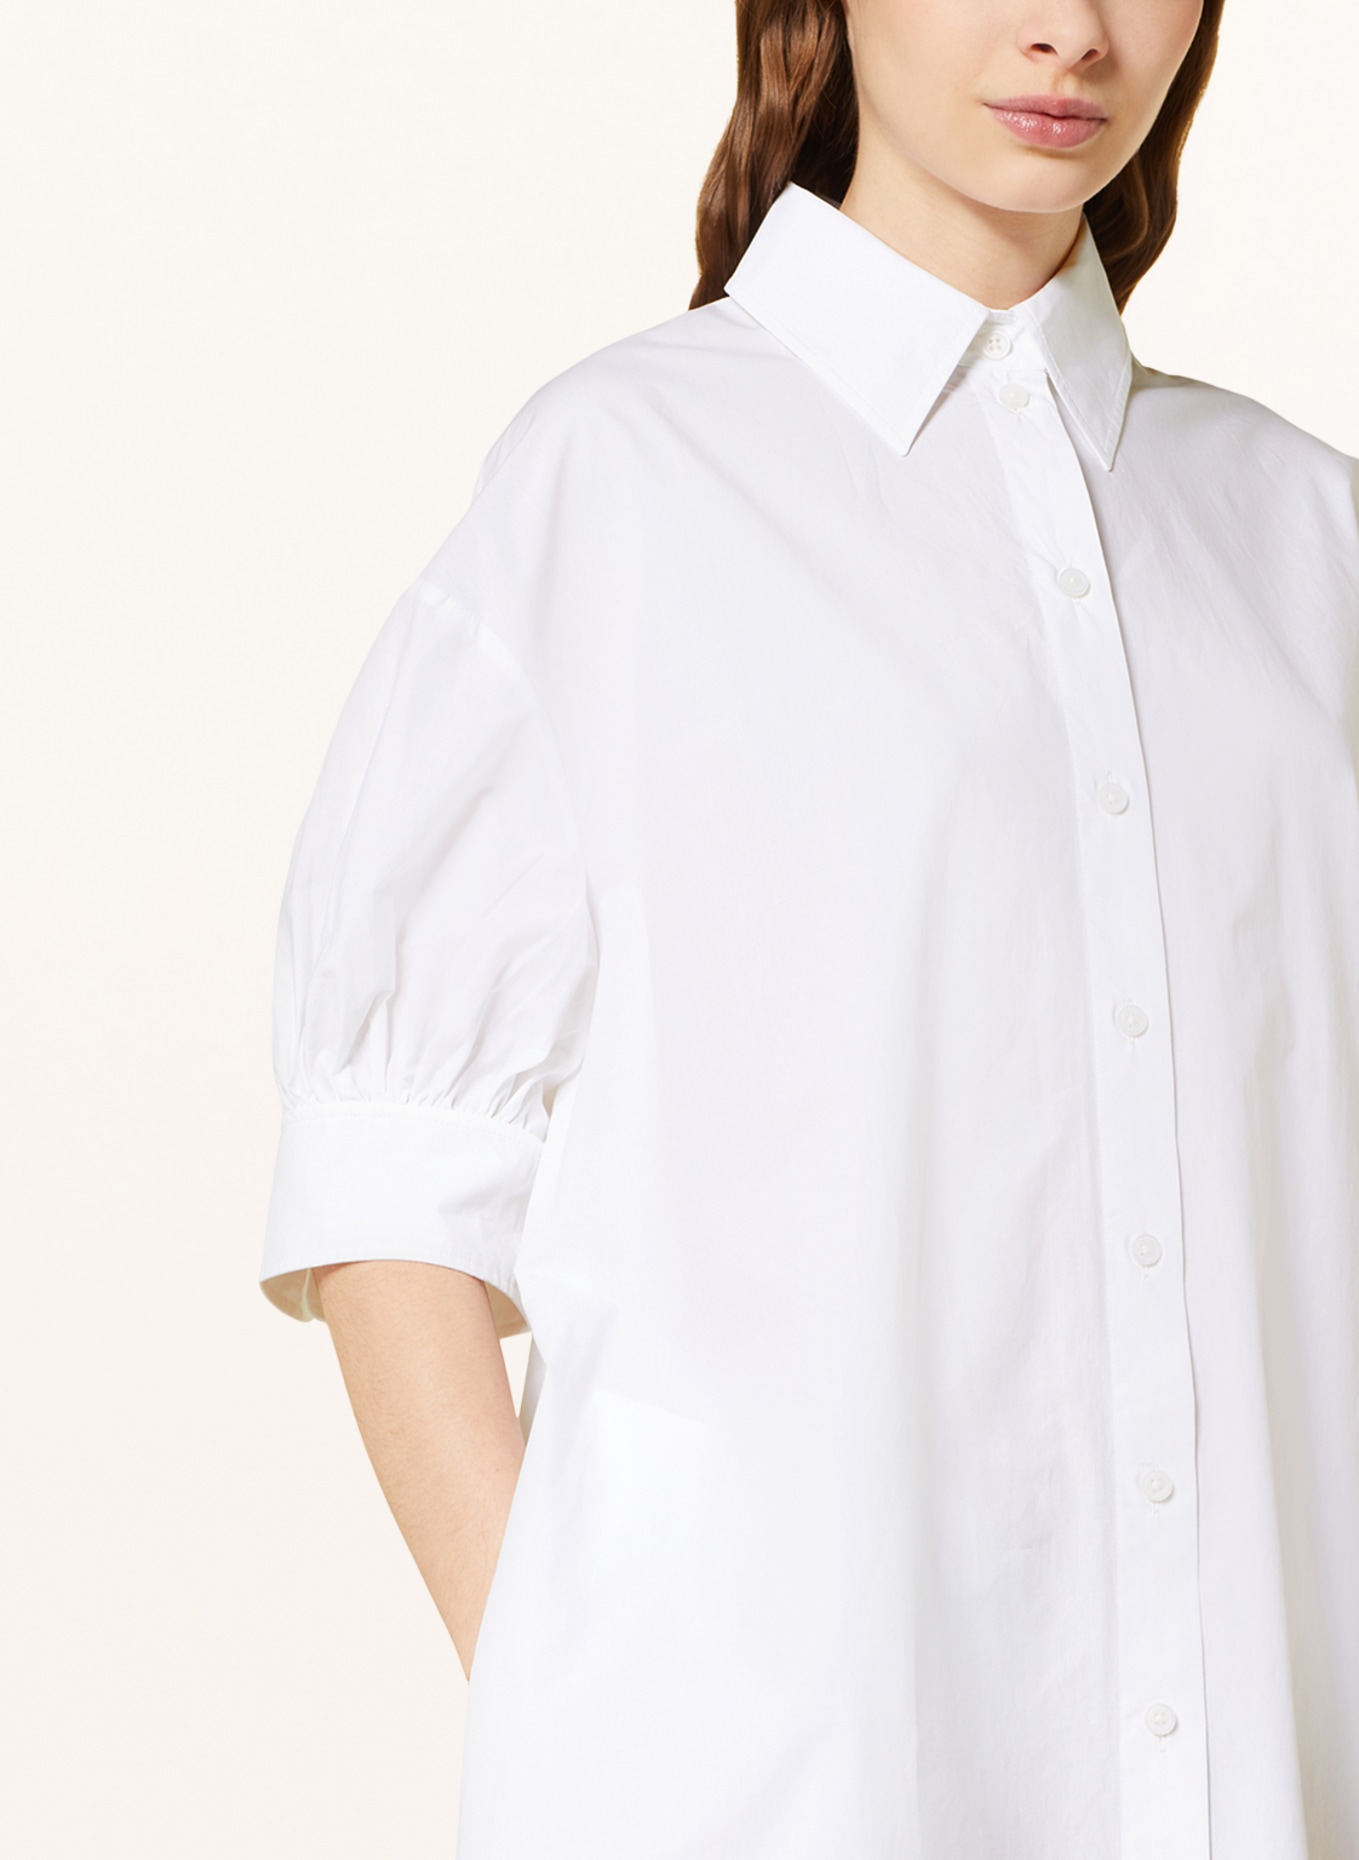 COS - A new take on the shirt dress. Designed with